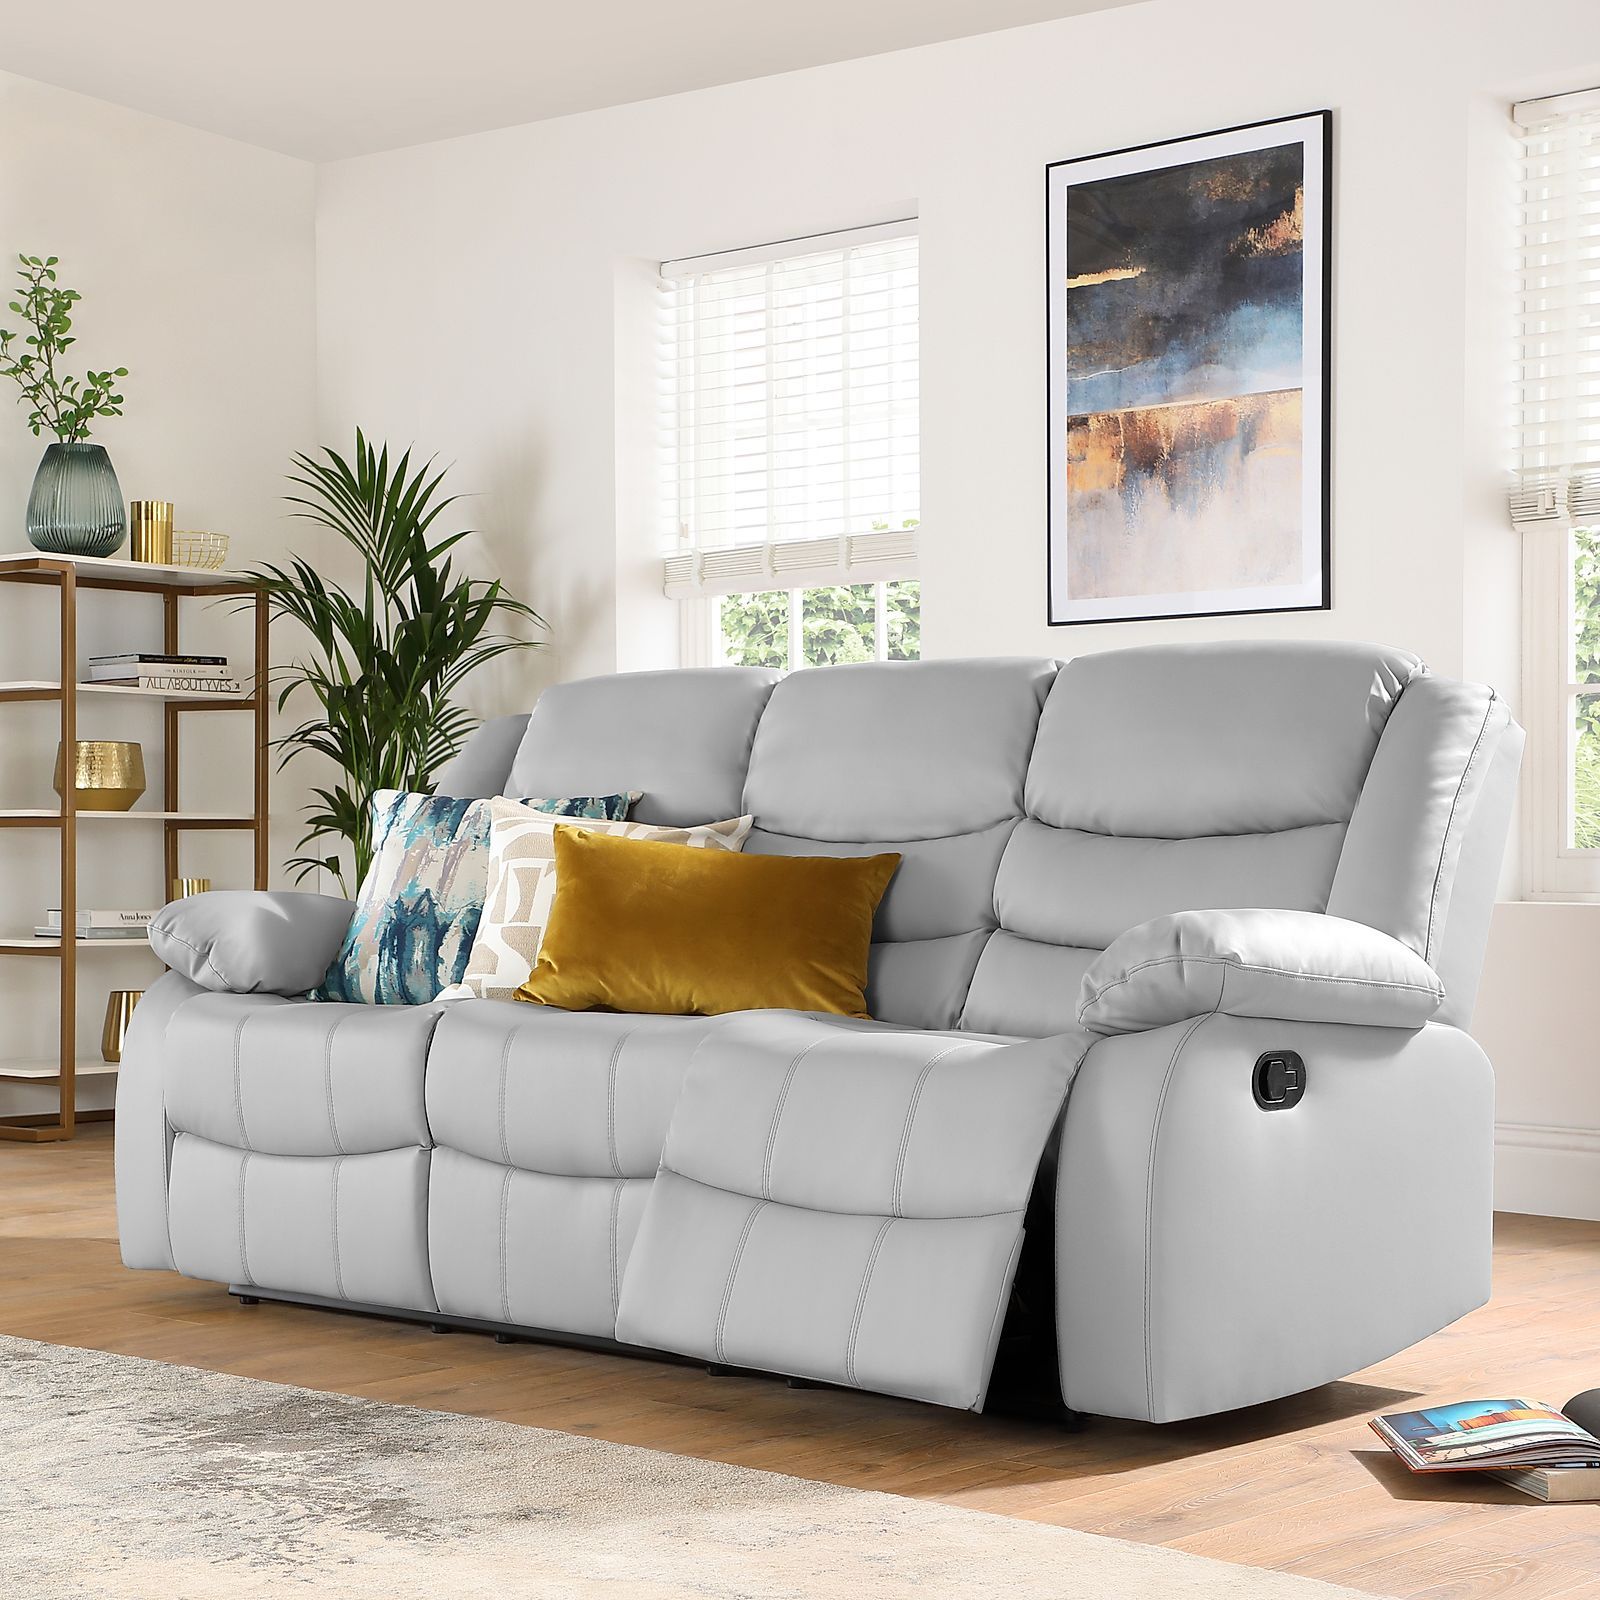 Sorrento Light Grey Leather 3 Seater Recliner Sofa | Furniture Choice For Sofas In Light Grey (View 14 of 20)